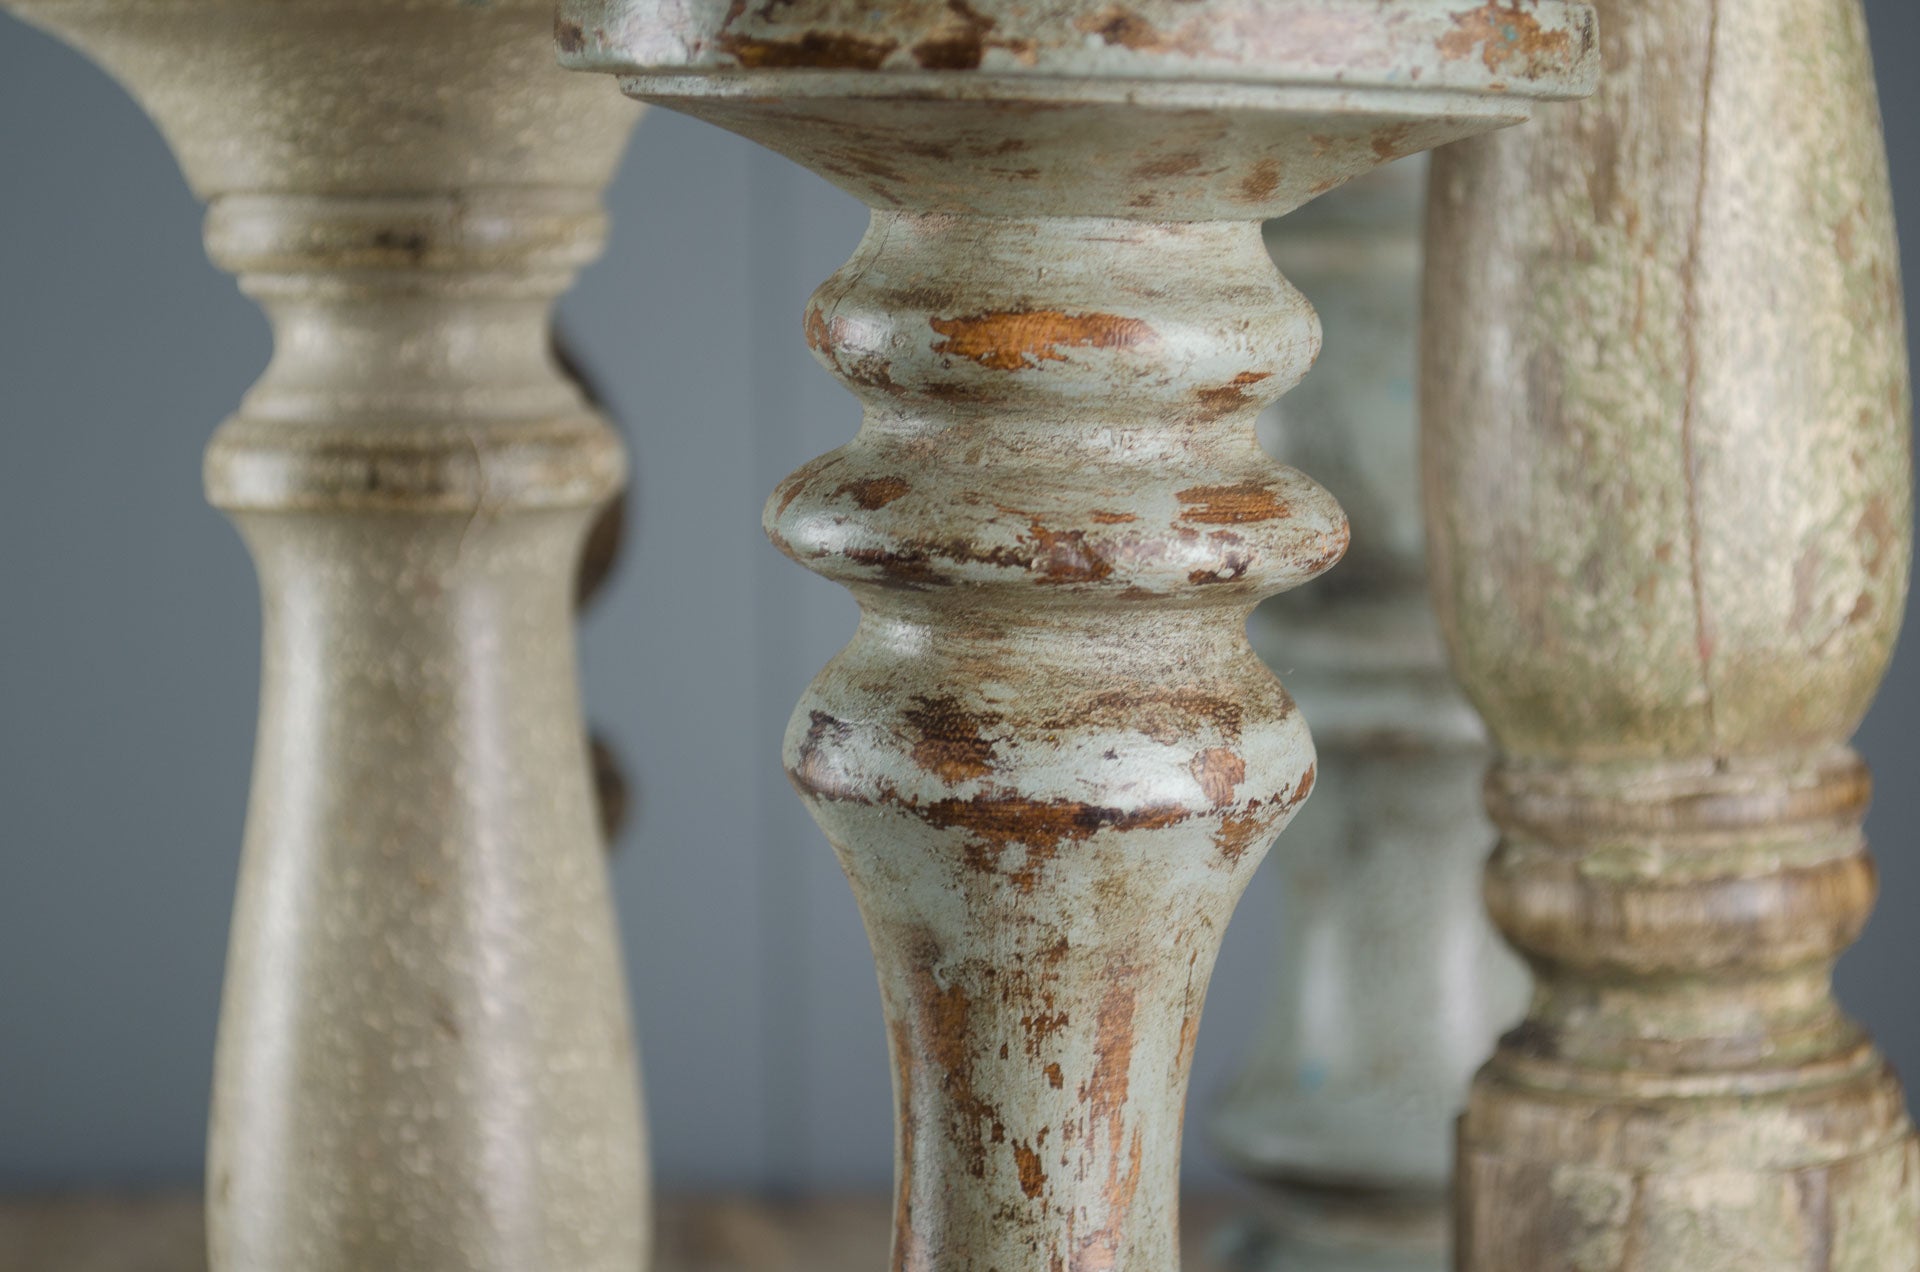 Painted candlesticks